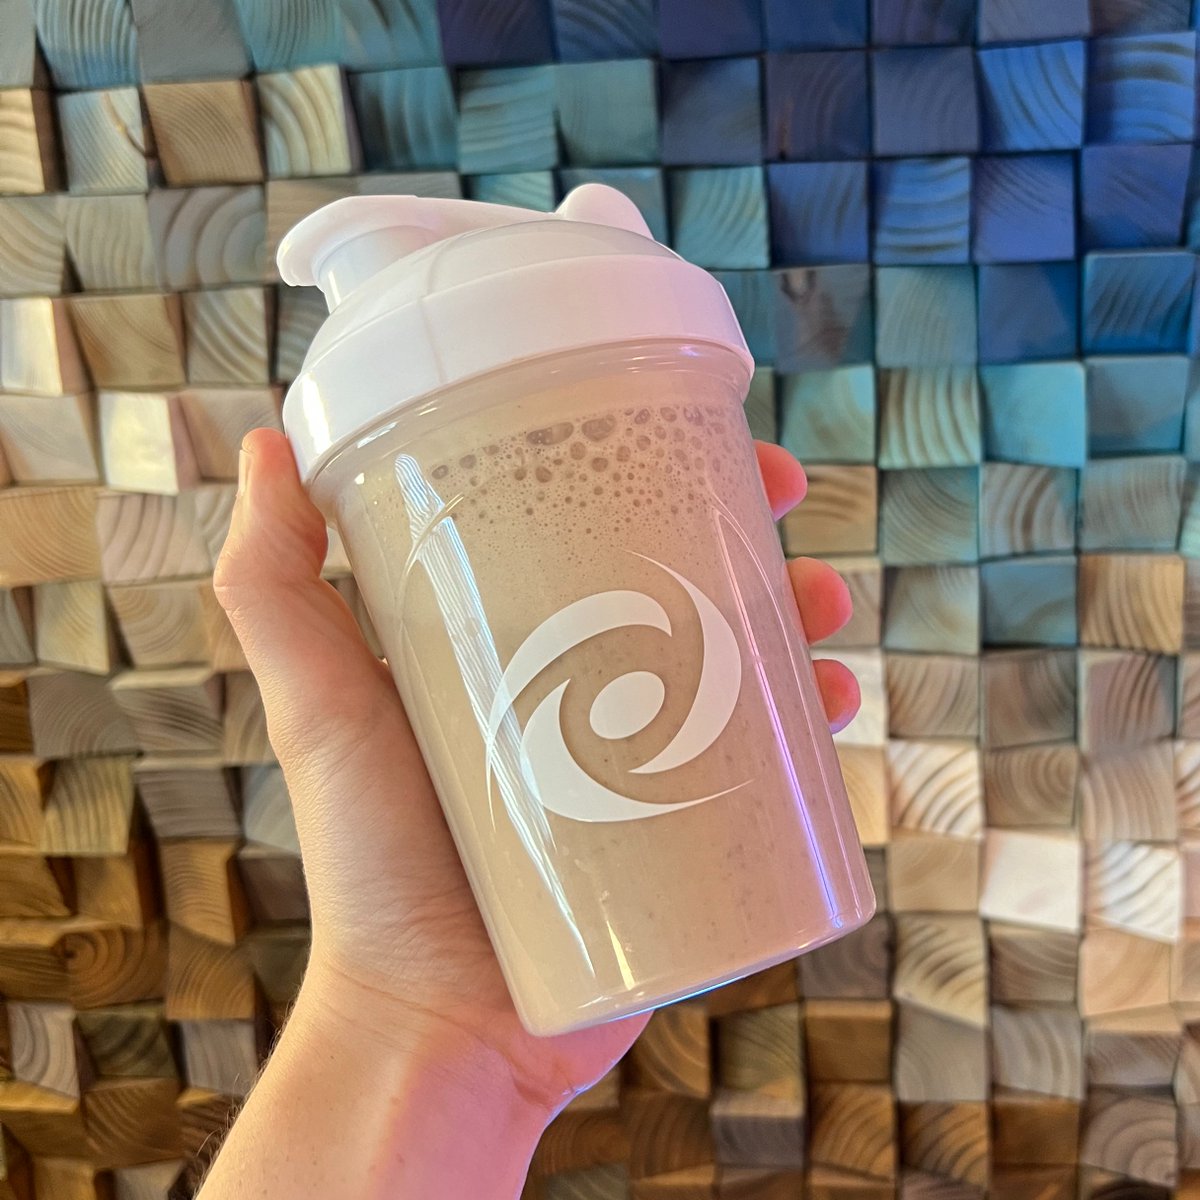 It's finally here! @GFuelEnergy Energy + Protein (15g of Protein, 140mg of Caffeine) is now available & Code 'IMMORTAL' gets you that nice discount at checkout! ➡️ gfuel.ly/2I2TTXT